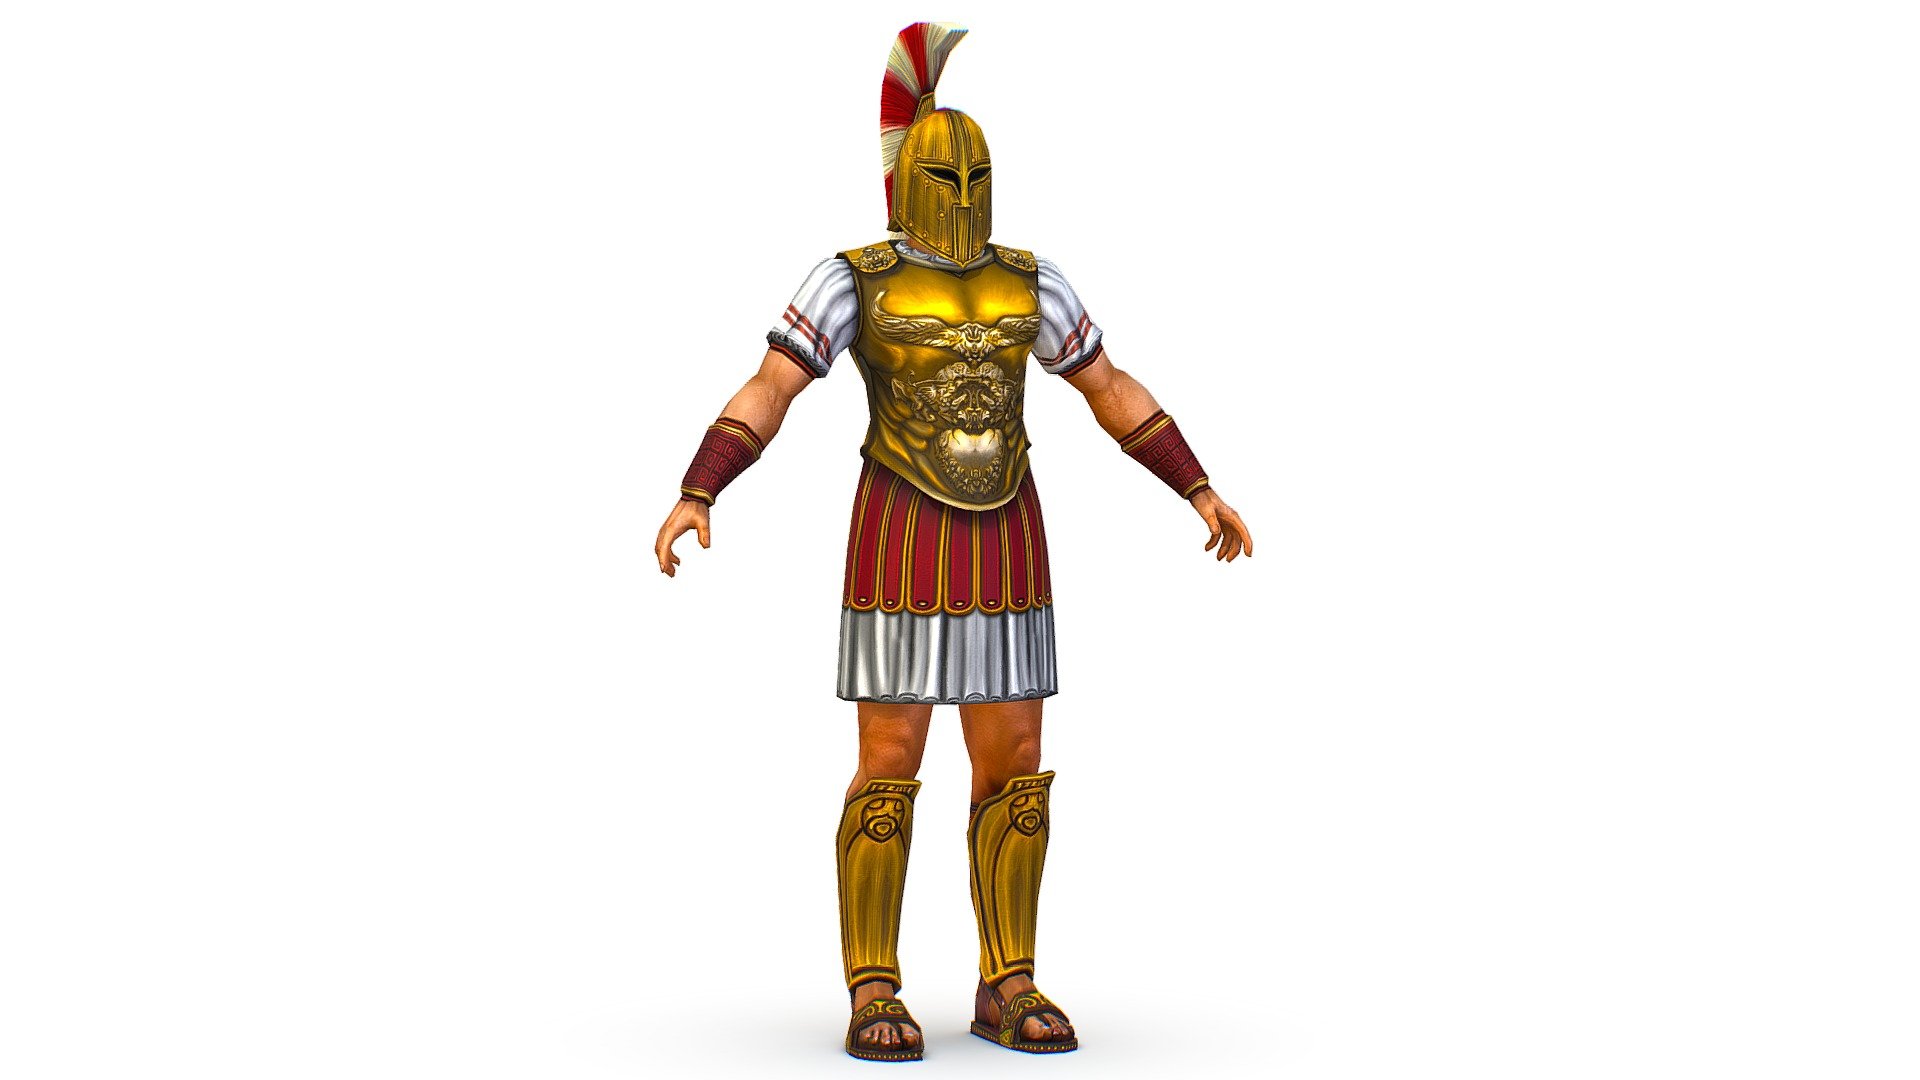 An ancient warrior in gold armor and helmet - 3dsMax file included/ texture 1024 color only 3d model